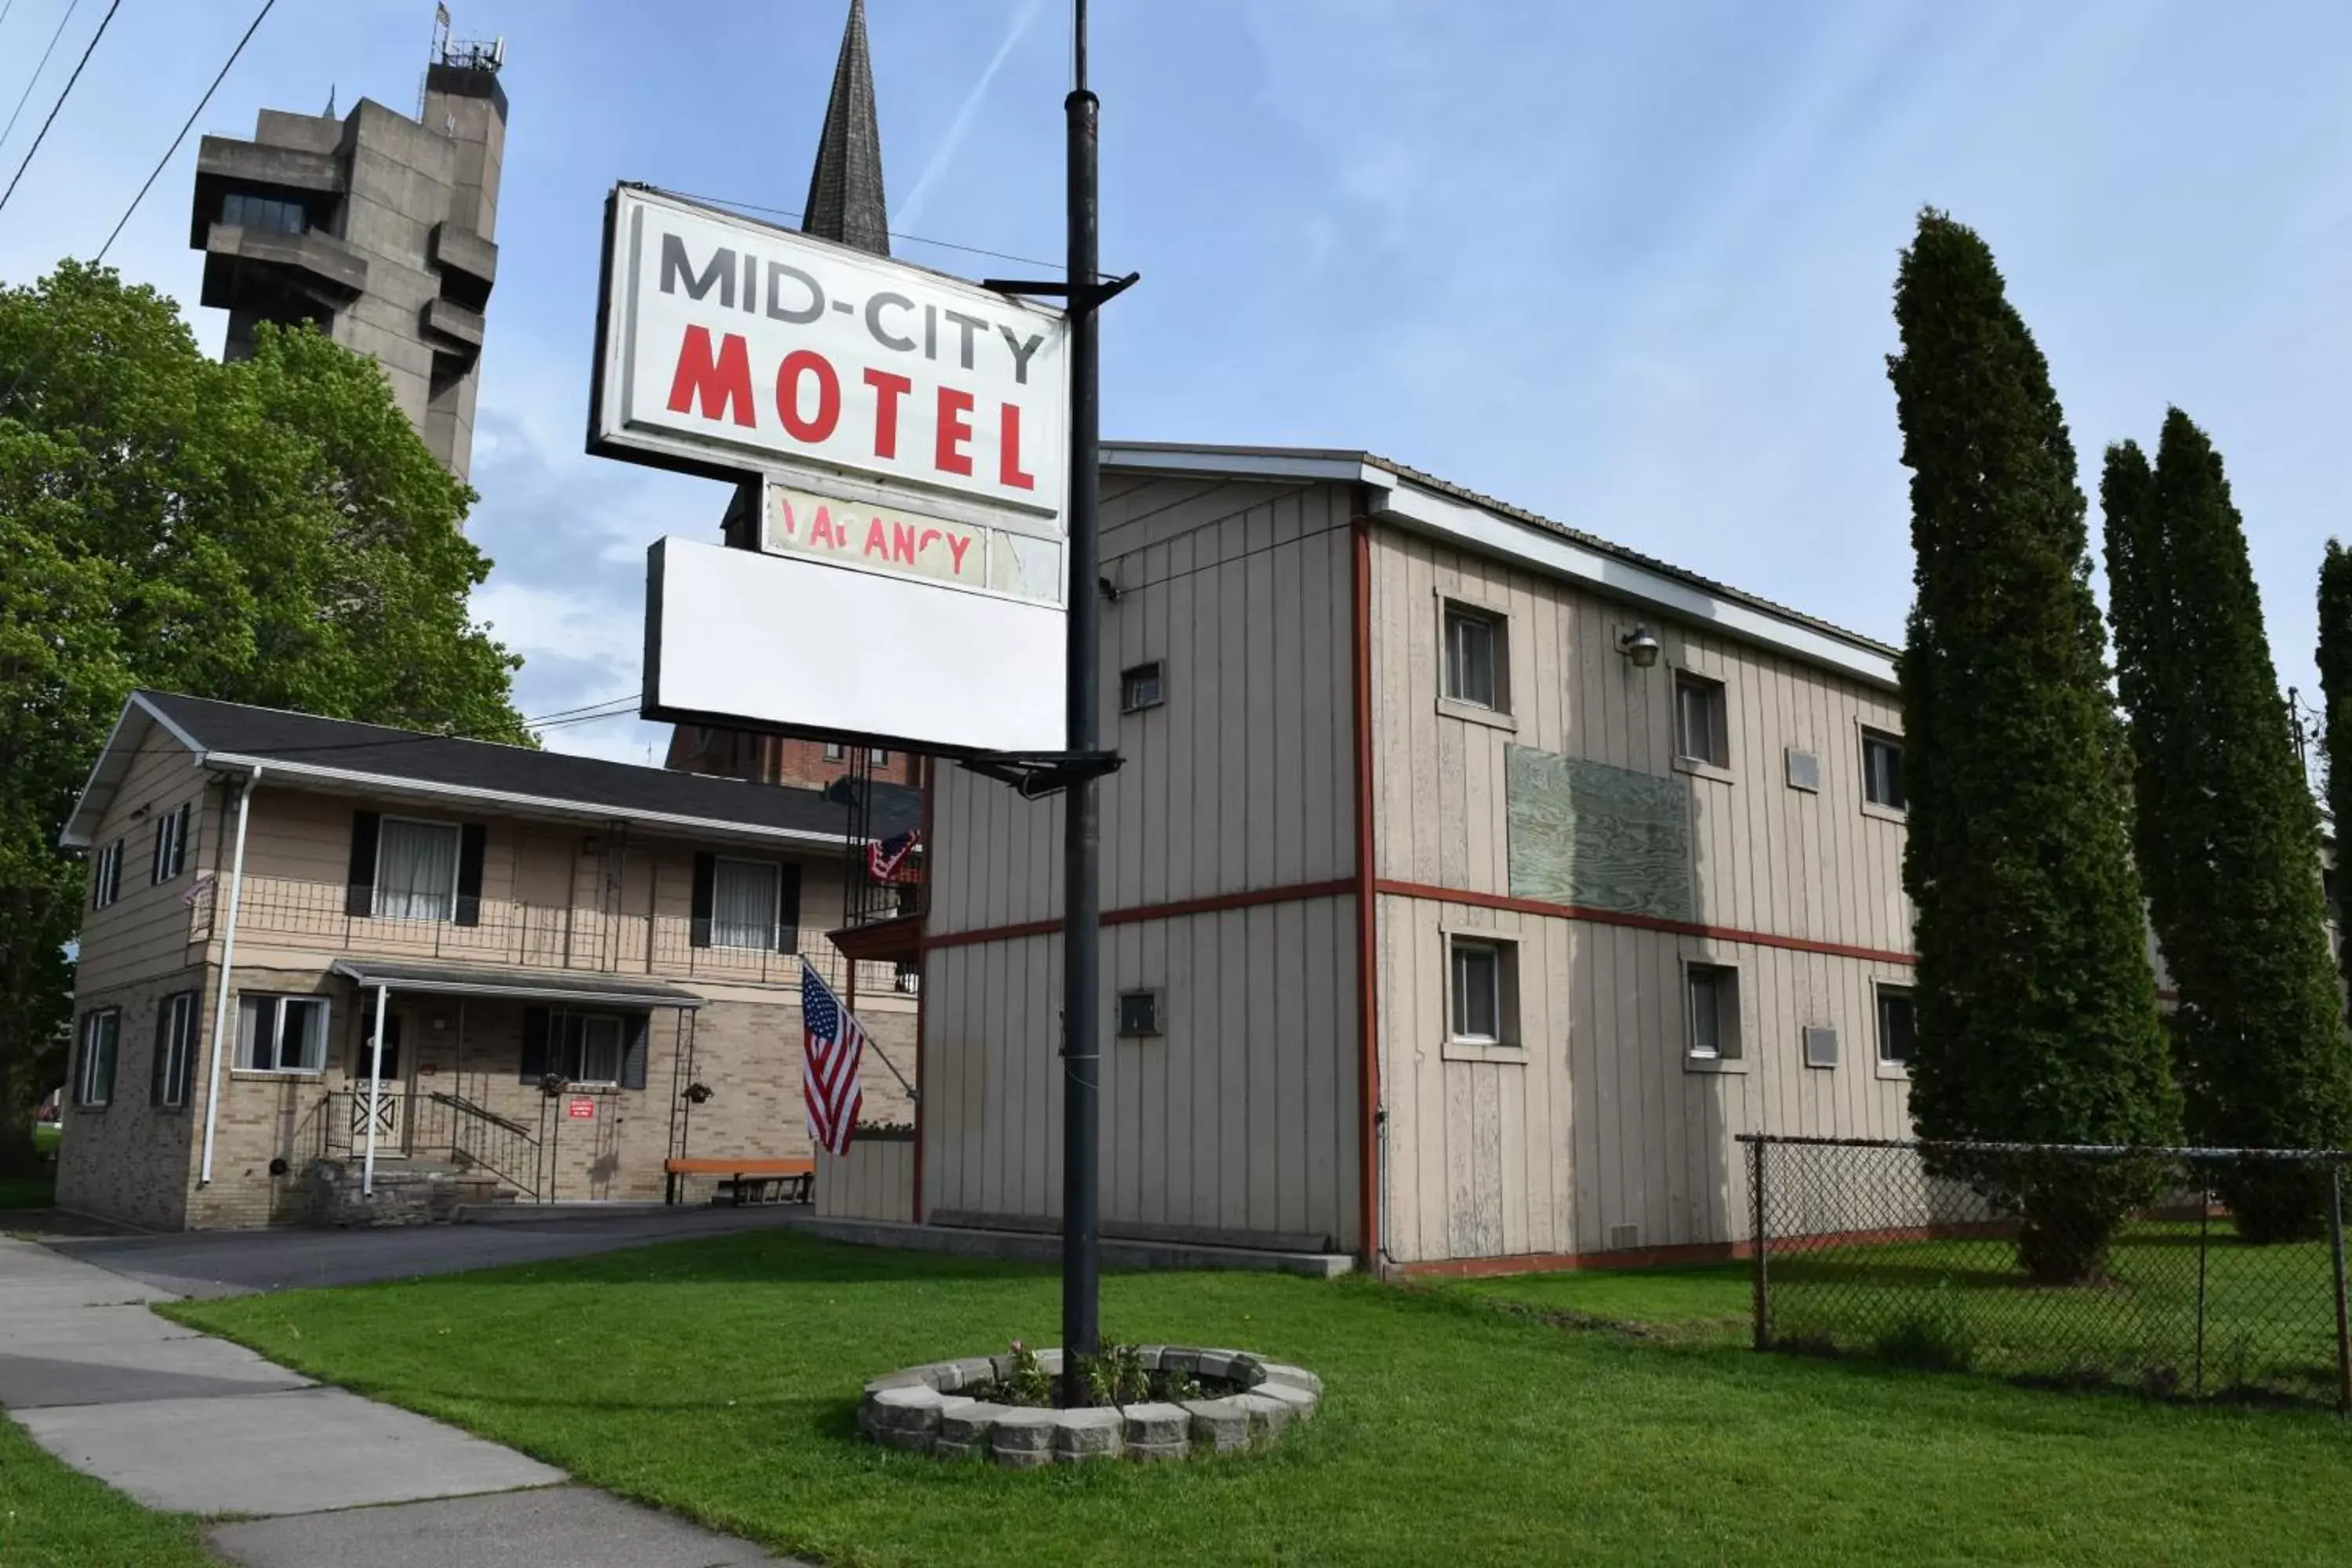 Property Building in Mid-City Motel